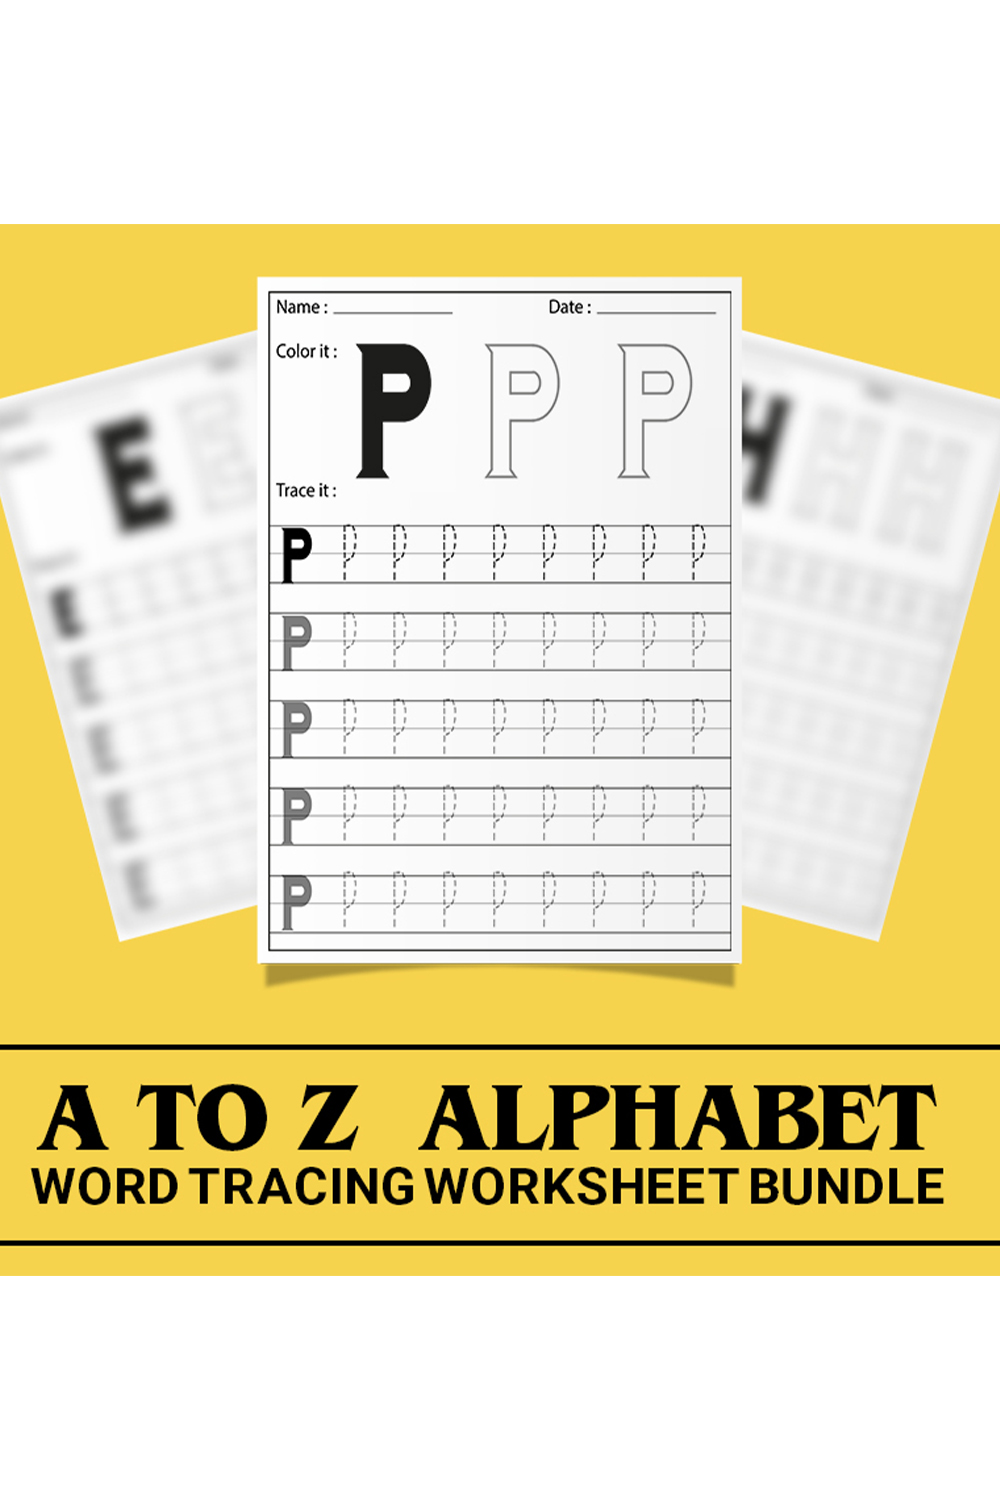 A pack of images of unique sheets for learning letters